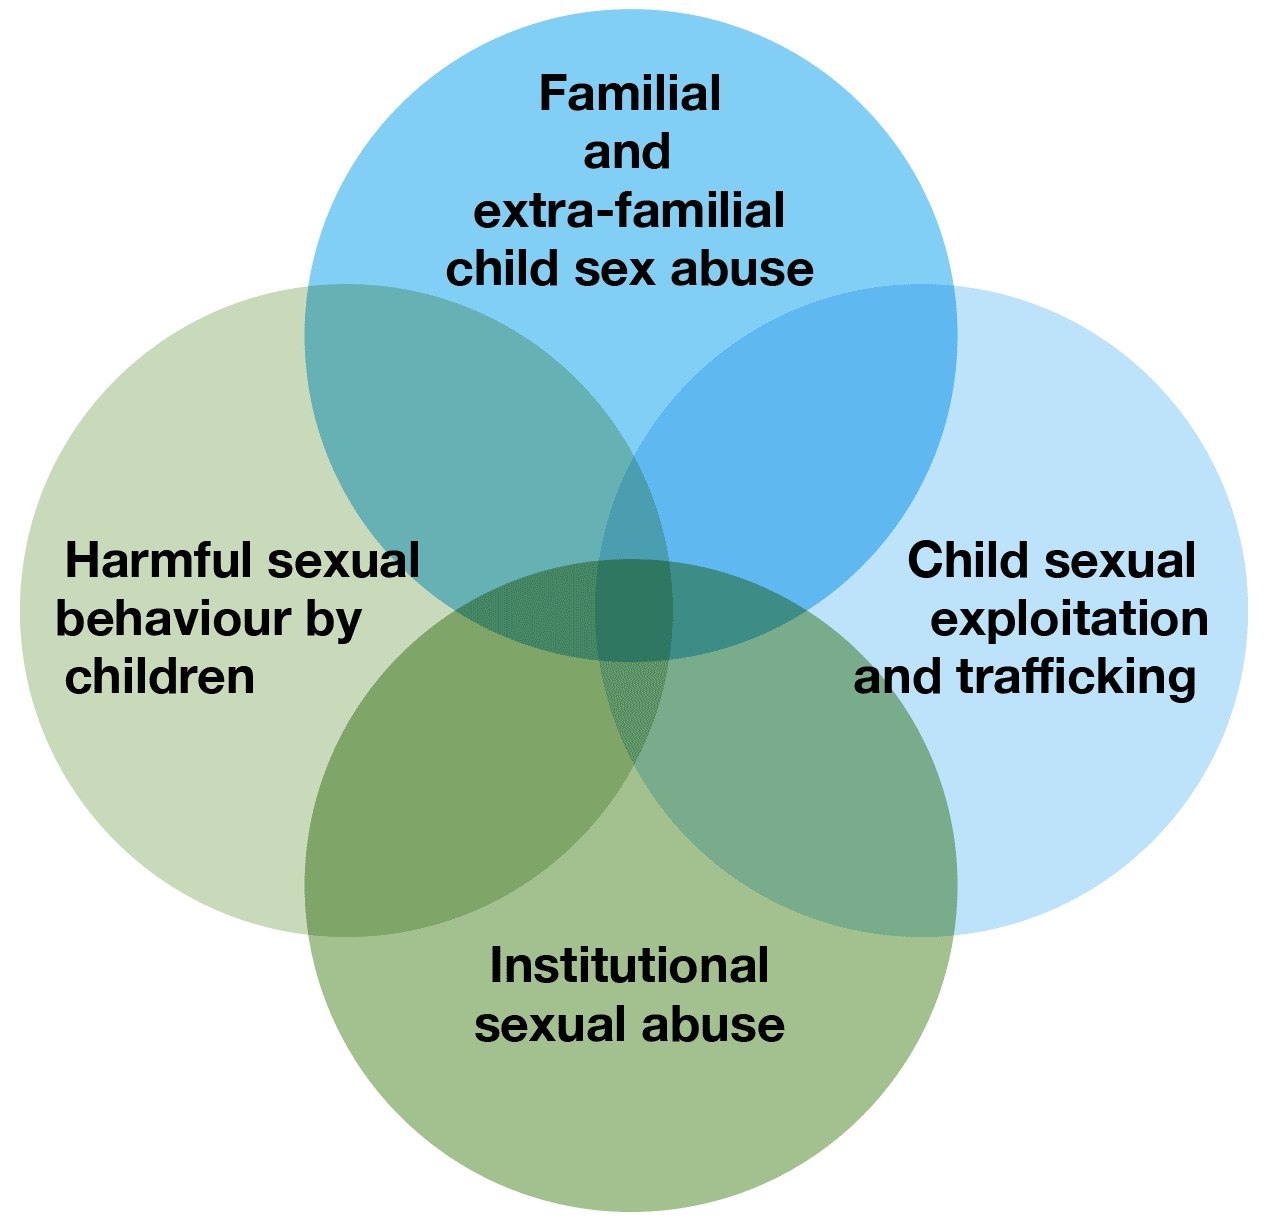 Familial and extra-familial child sex abuse, Harmful sexual behaviour by children, Child sexual exploitation and trafficking, Institutional sexual abuse